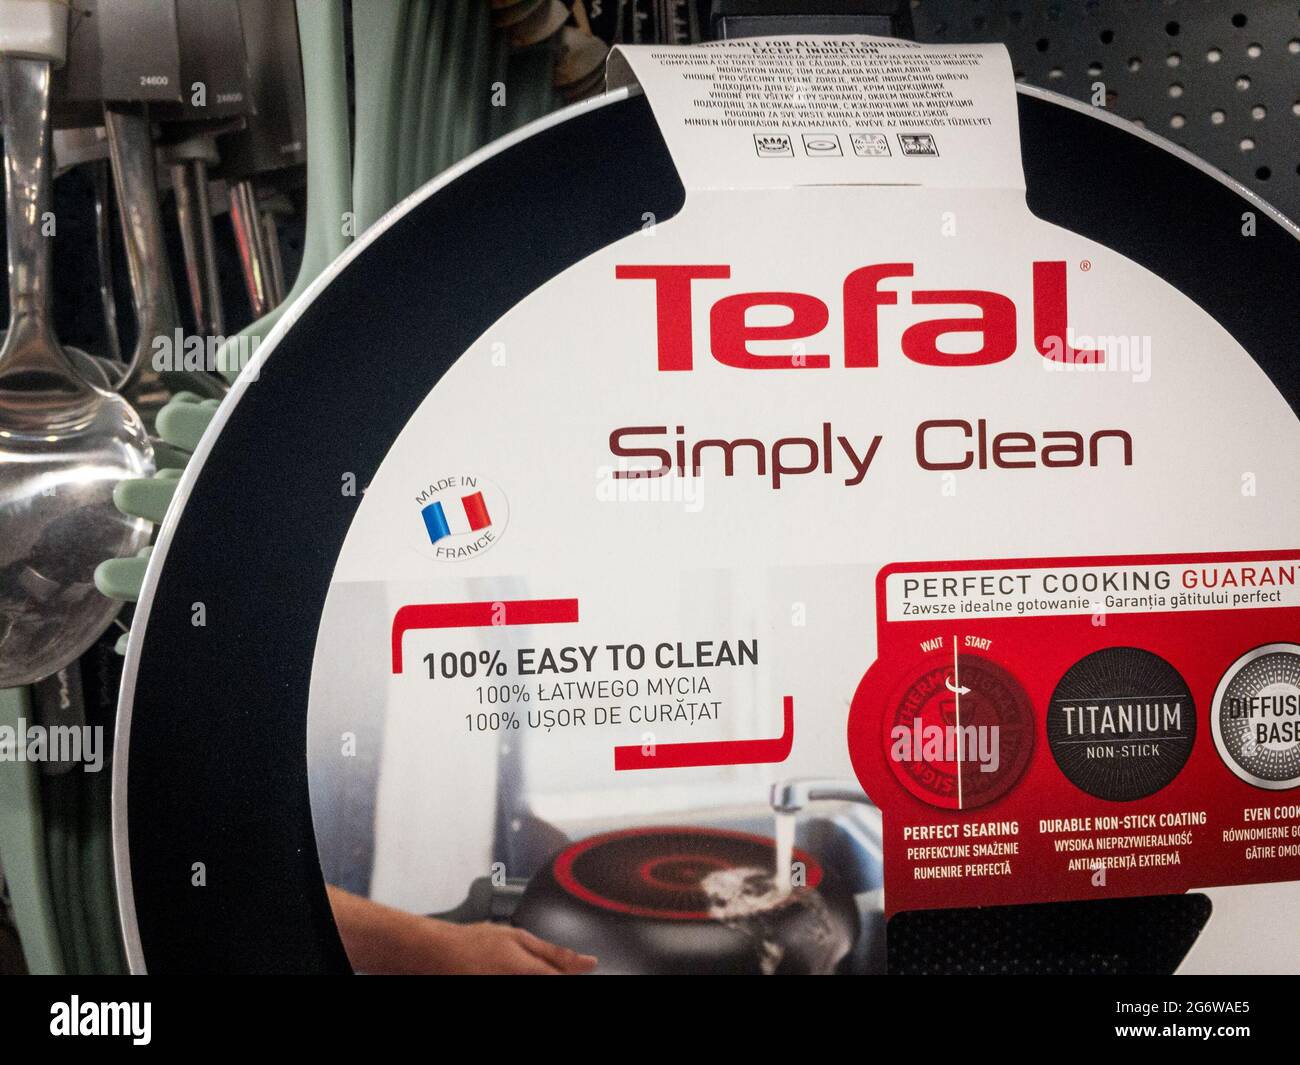 https://c8.alamy.com/comp/2G6WAE5/picture-of-a-frying-pan-with-the-logo-of-tefal-for-sale-in-belgrade-tefal-is-a-french-cookware-and-small-appliance-manufacturer-owned-by-groupe-seb-2G6WAE5.jpg